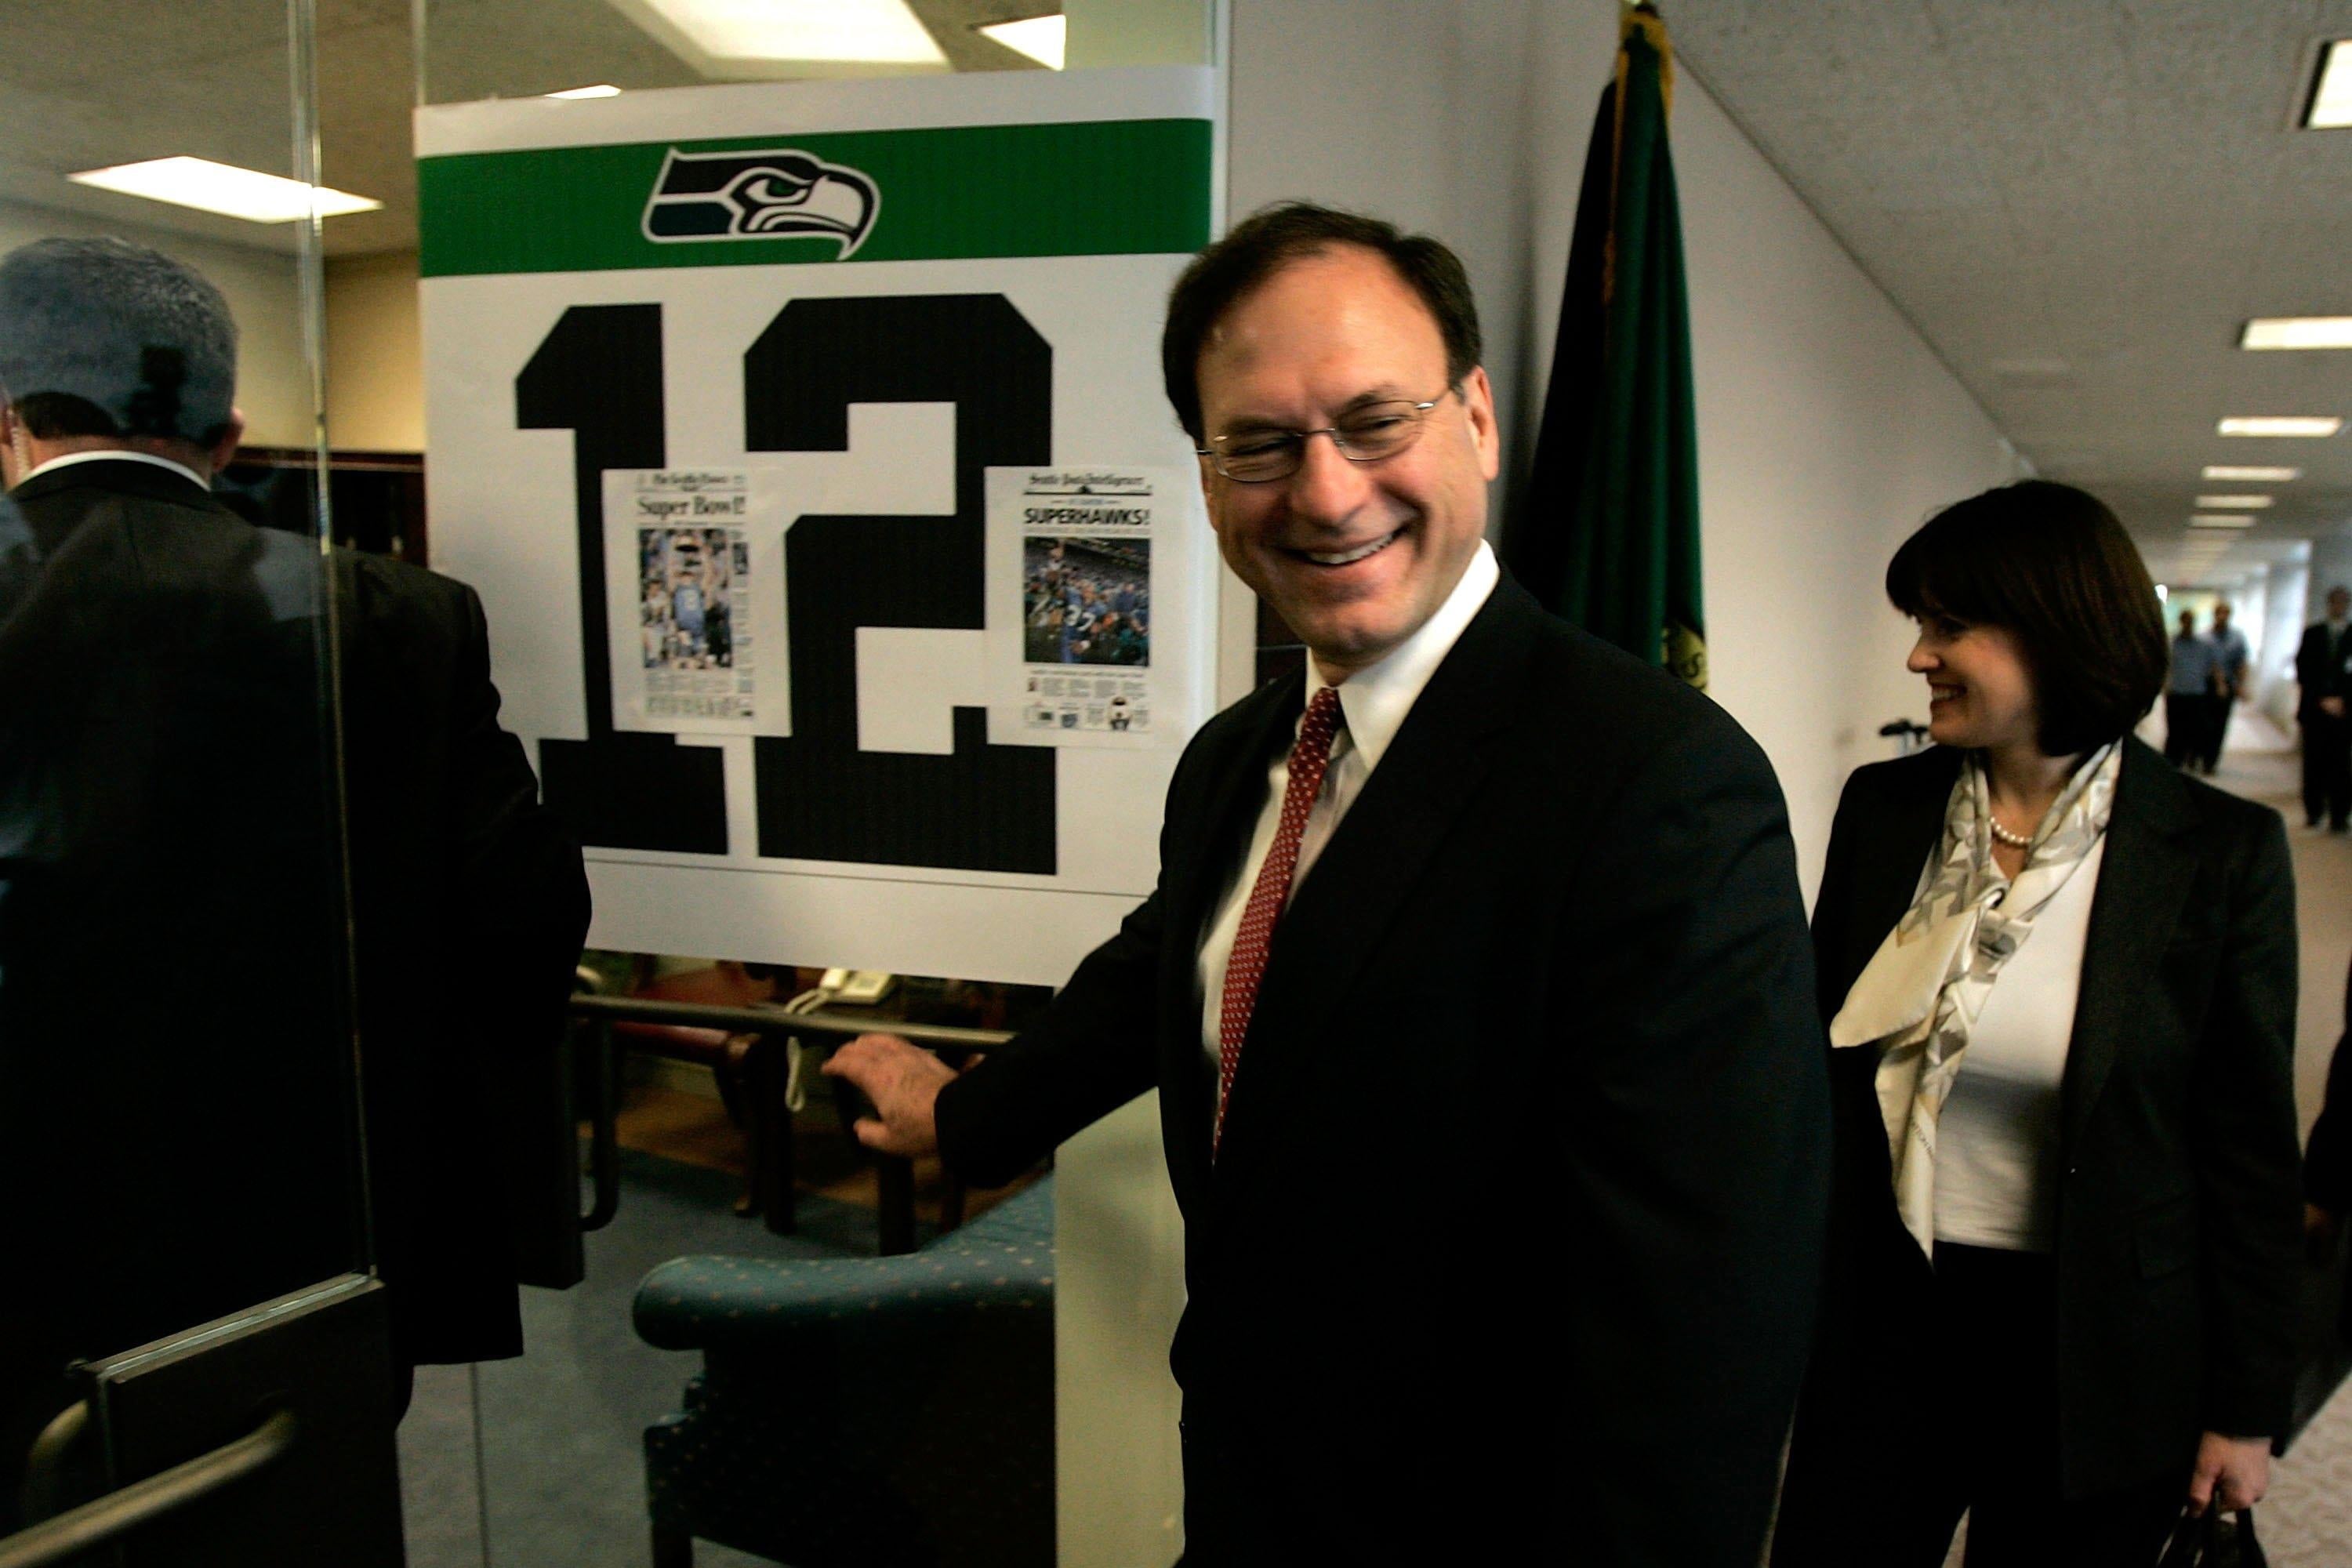 Alito visiting Maria Cantwell, grinning widely, and opening a door with a Seahawks logo on it.